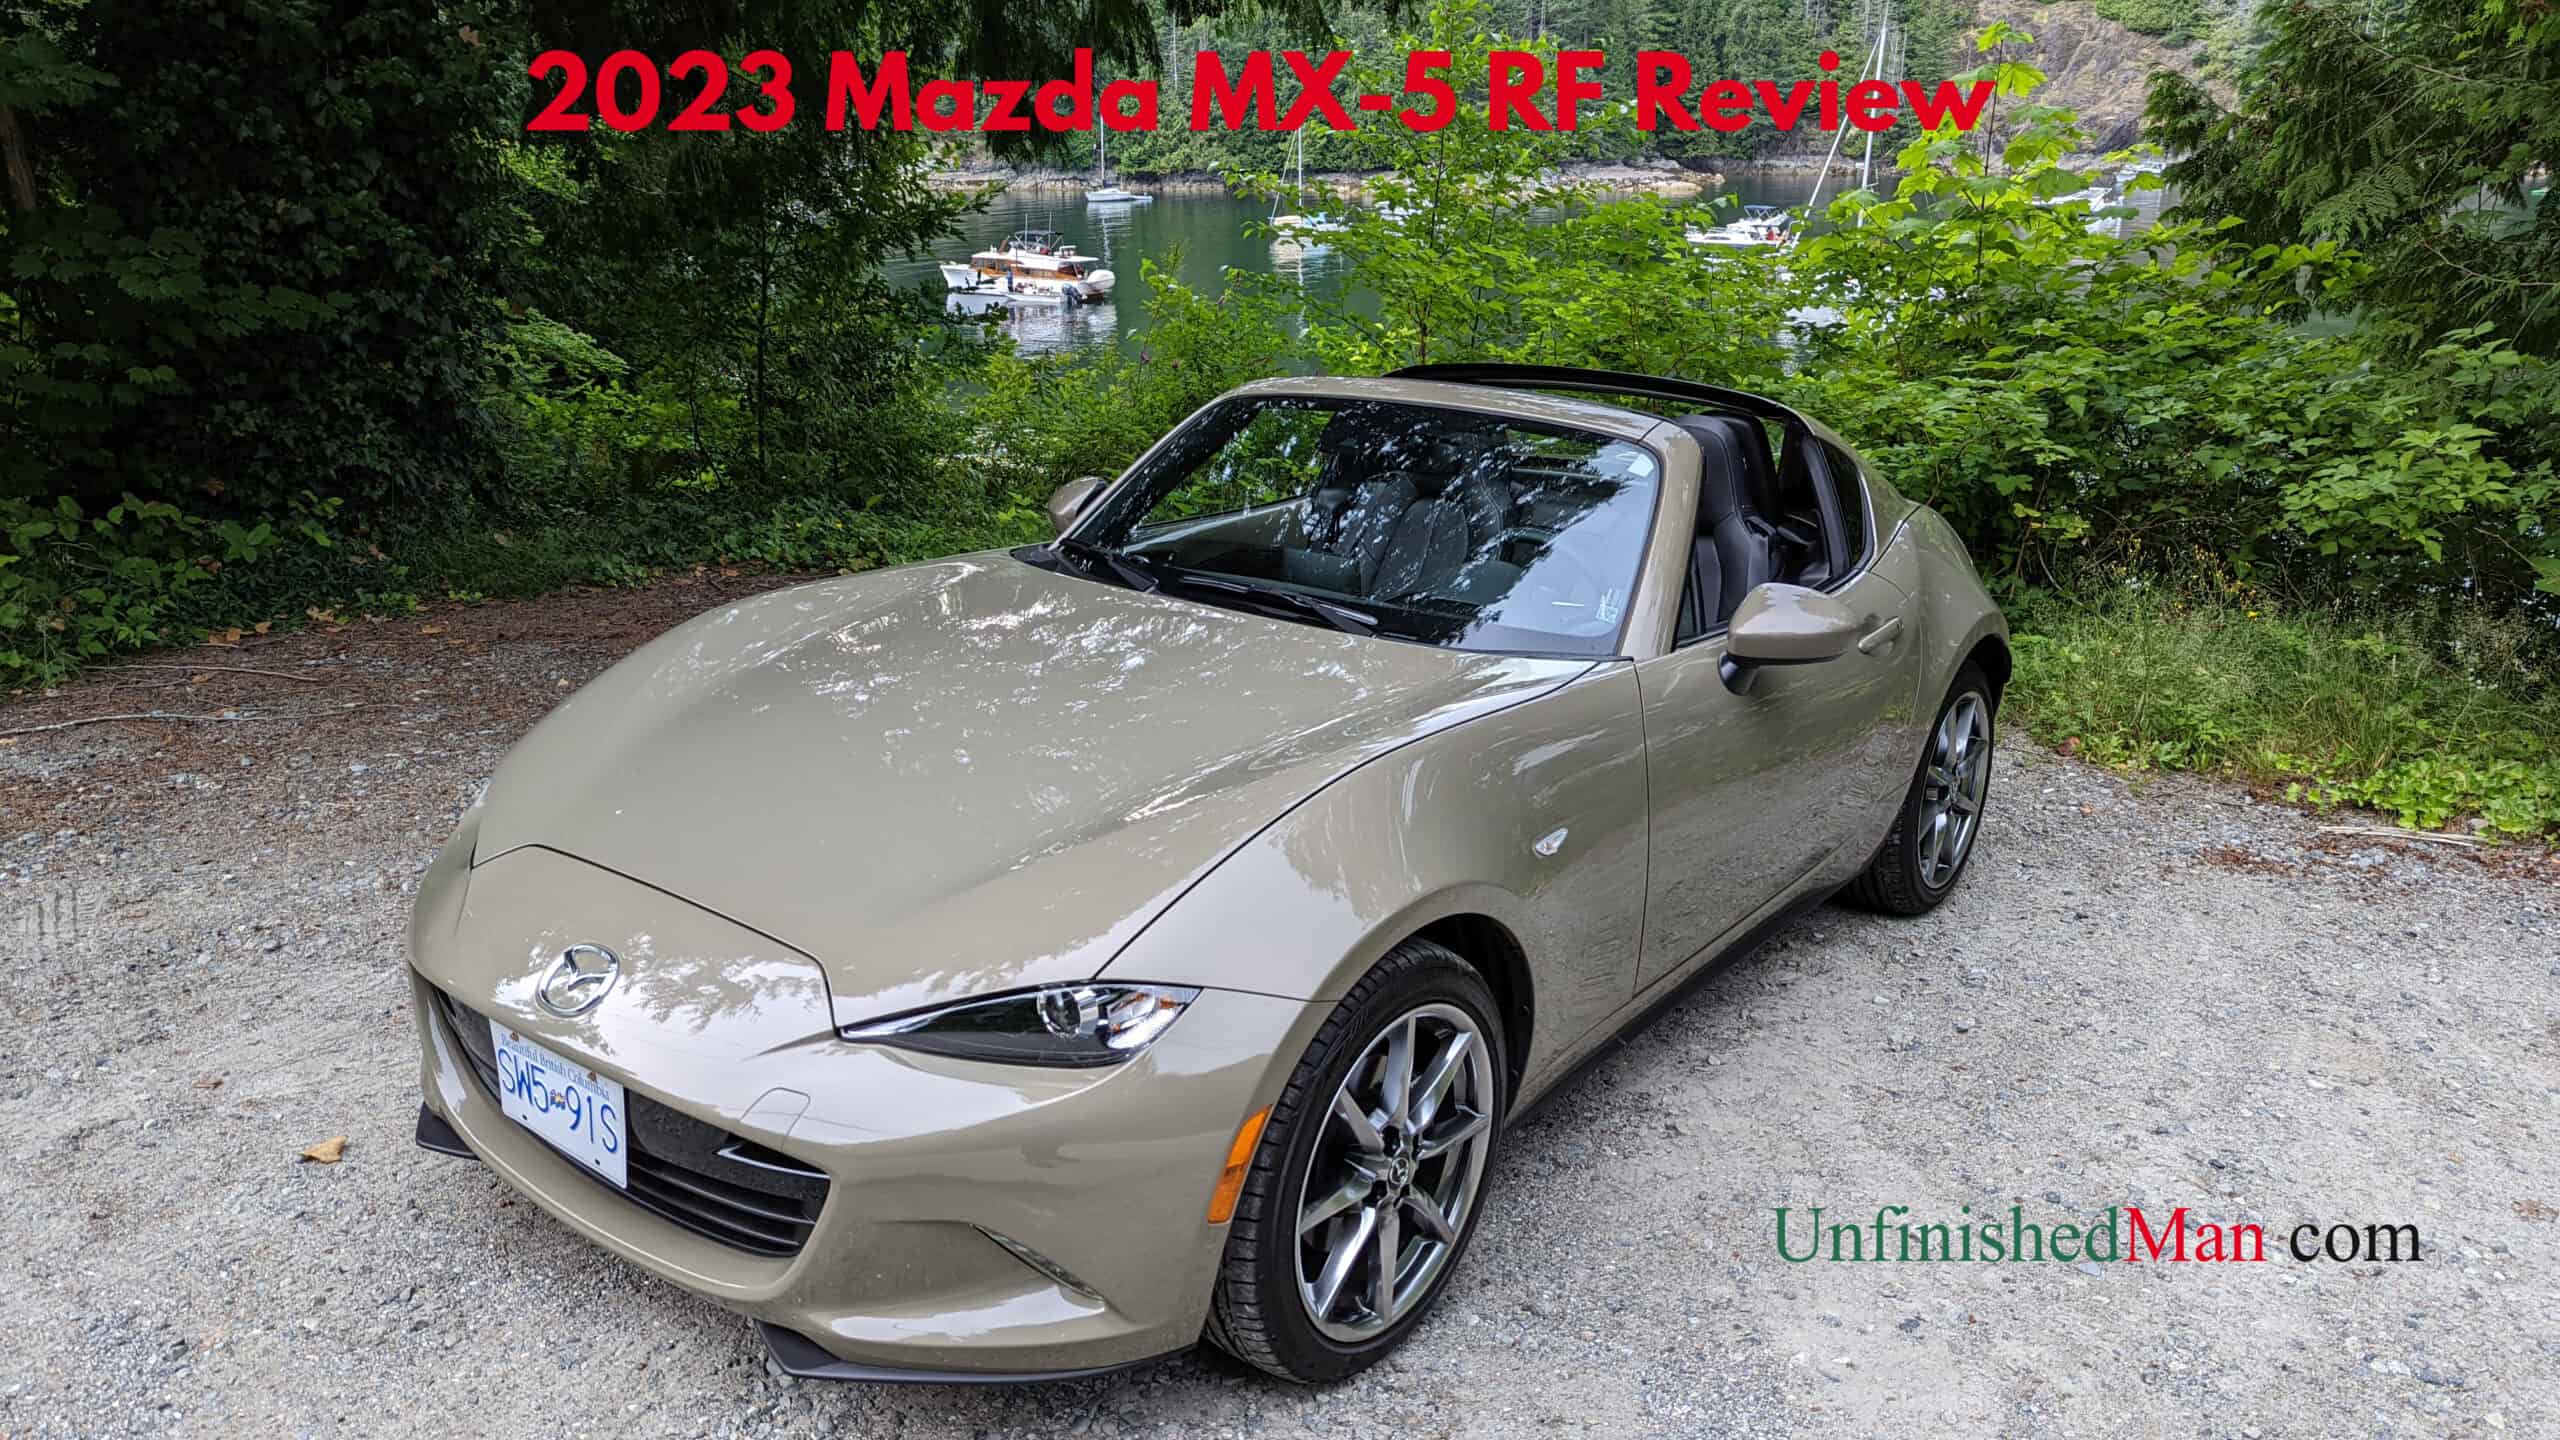 Expert review of the 2023 Mazda MX-5